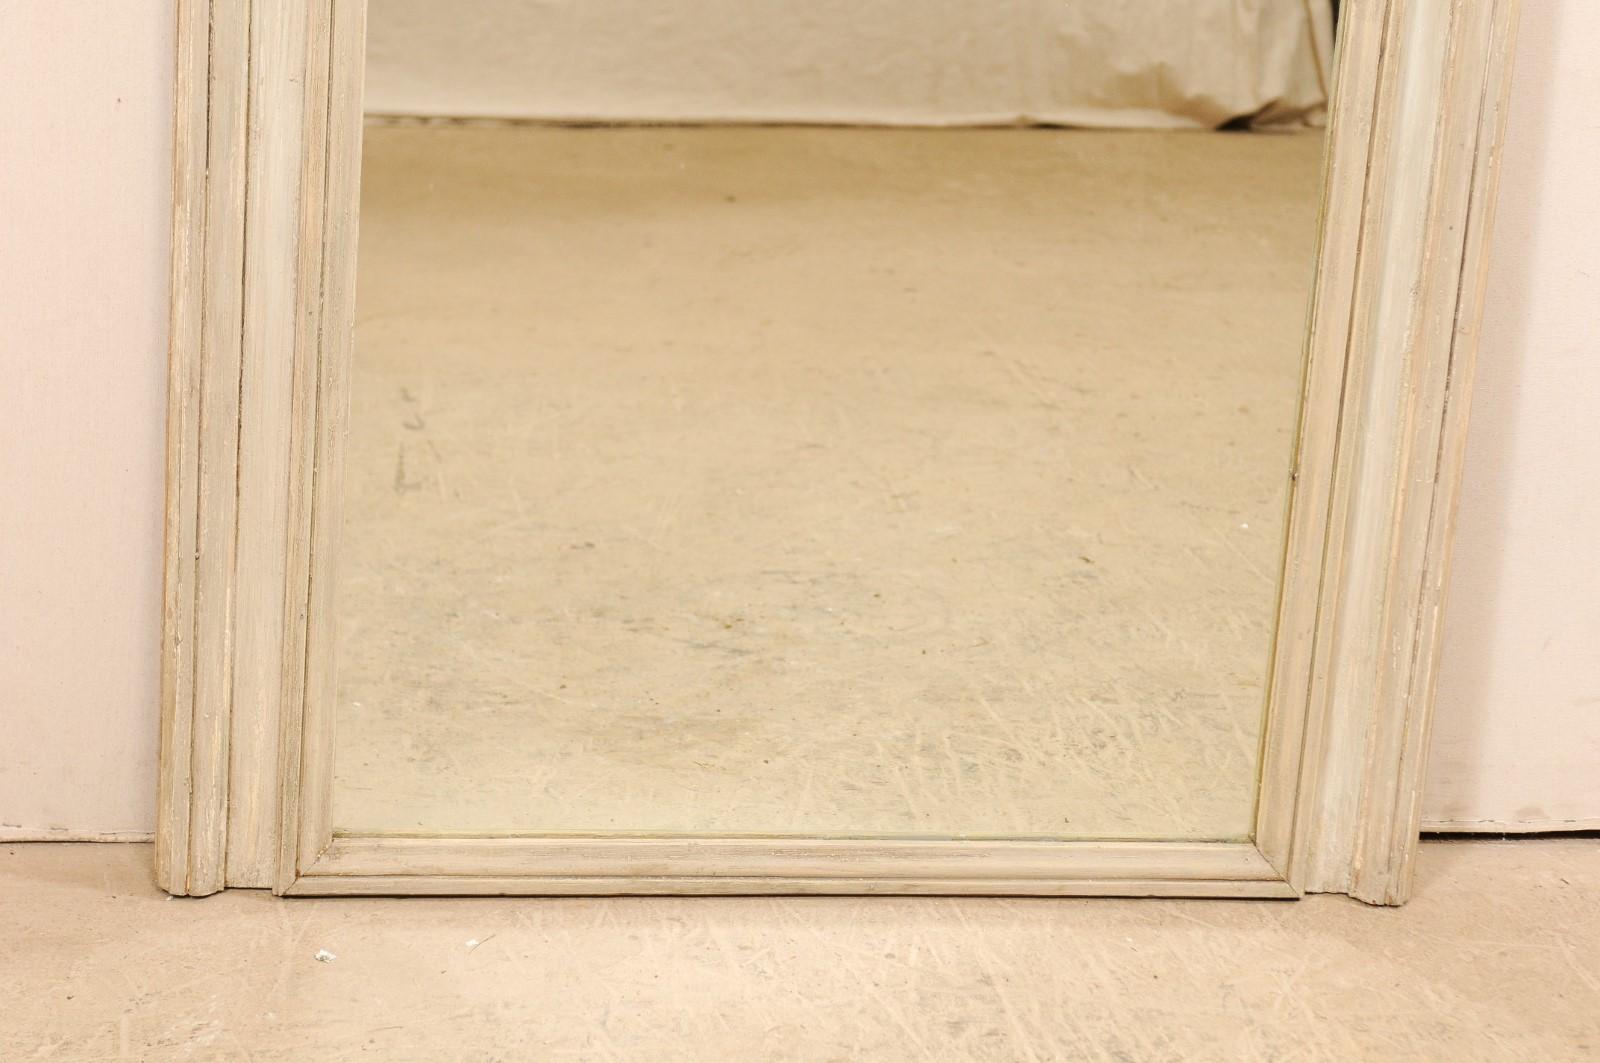 A Lovely French 19th Century Painted Wood Trumeau Mirror, 6.25 Ft. Tall  For Sale 2